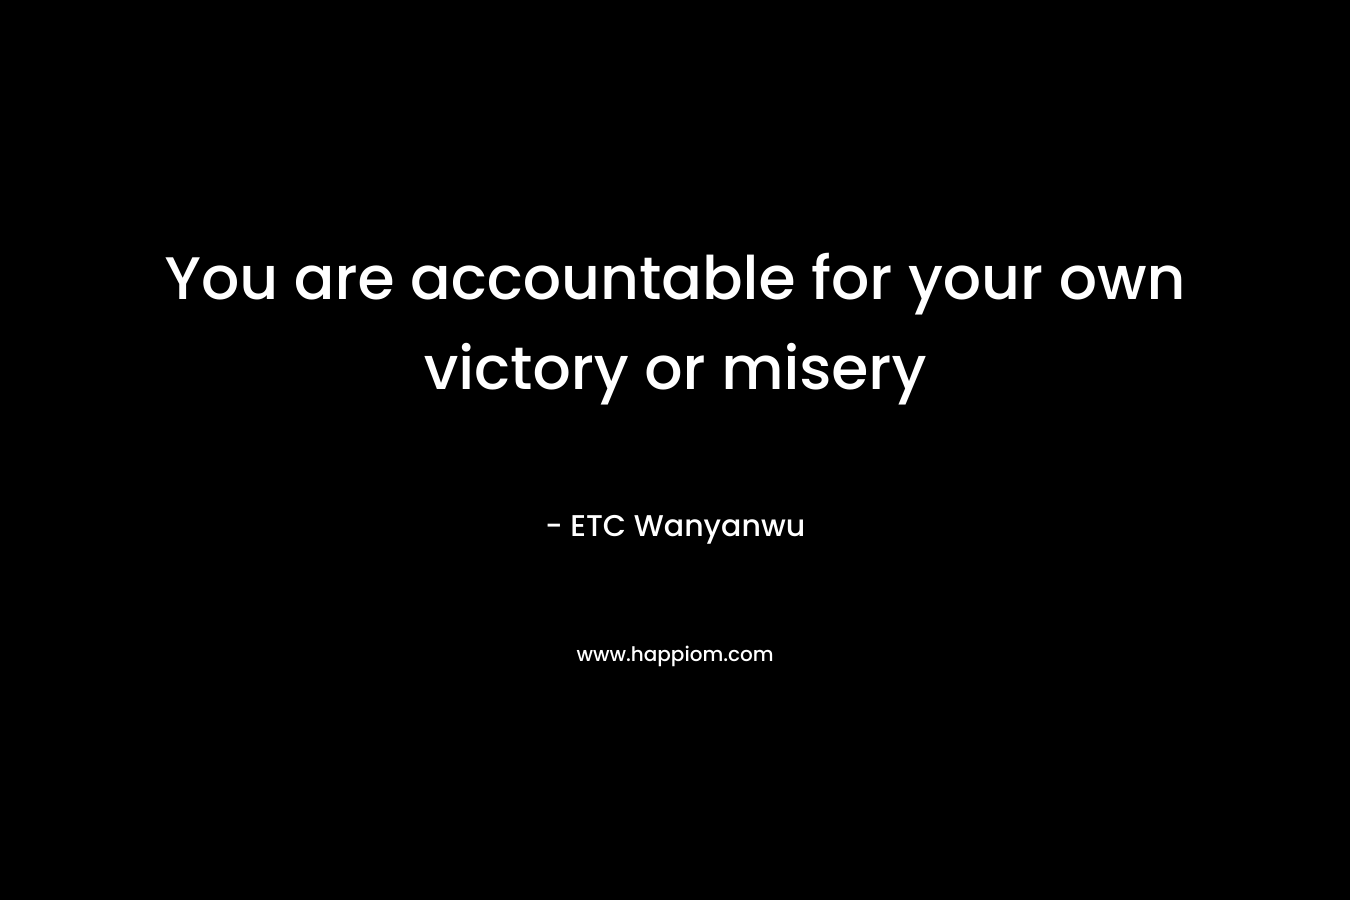 You are accountable for your own victory or misery – ETC Wanyanwu